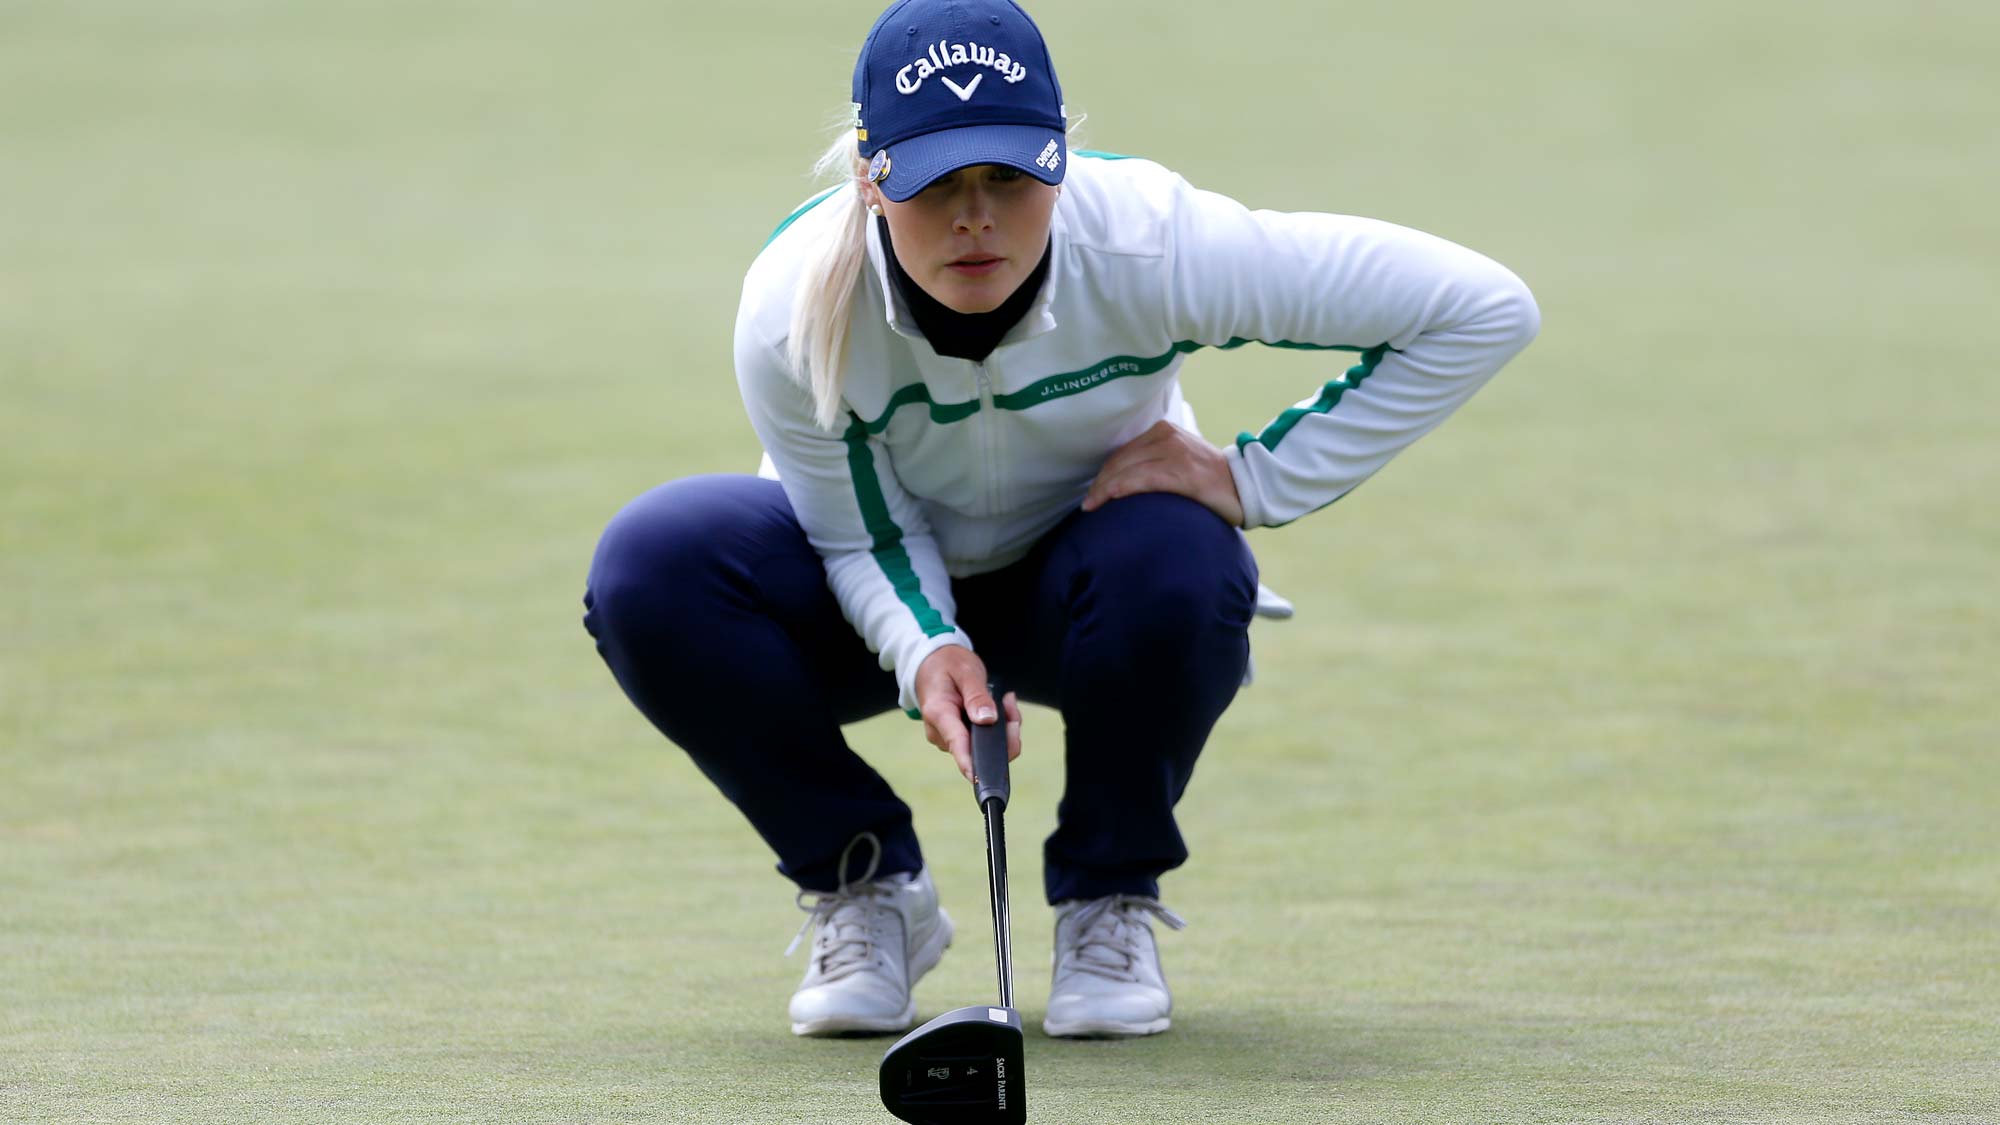 Louise Ridderstrom of Sweden lines up a putt on the 11th hole during the third round of the LPGA Mediheal Championship